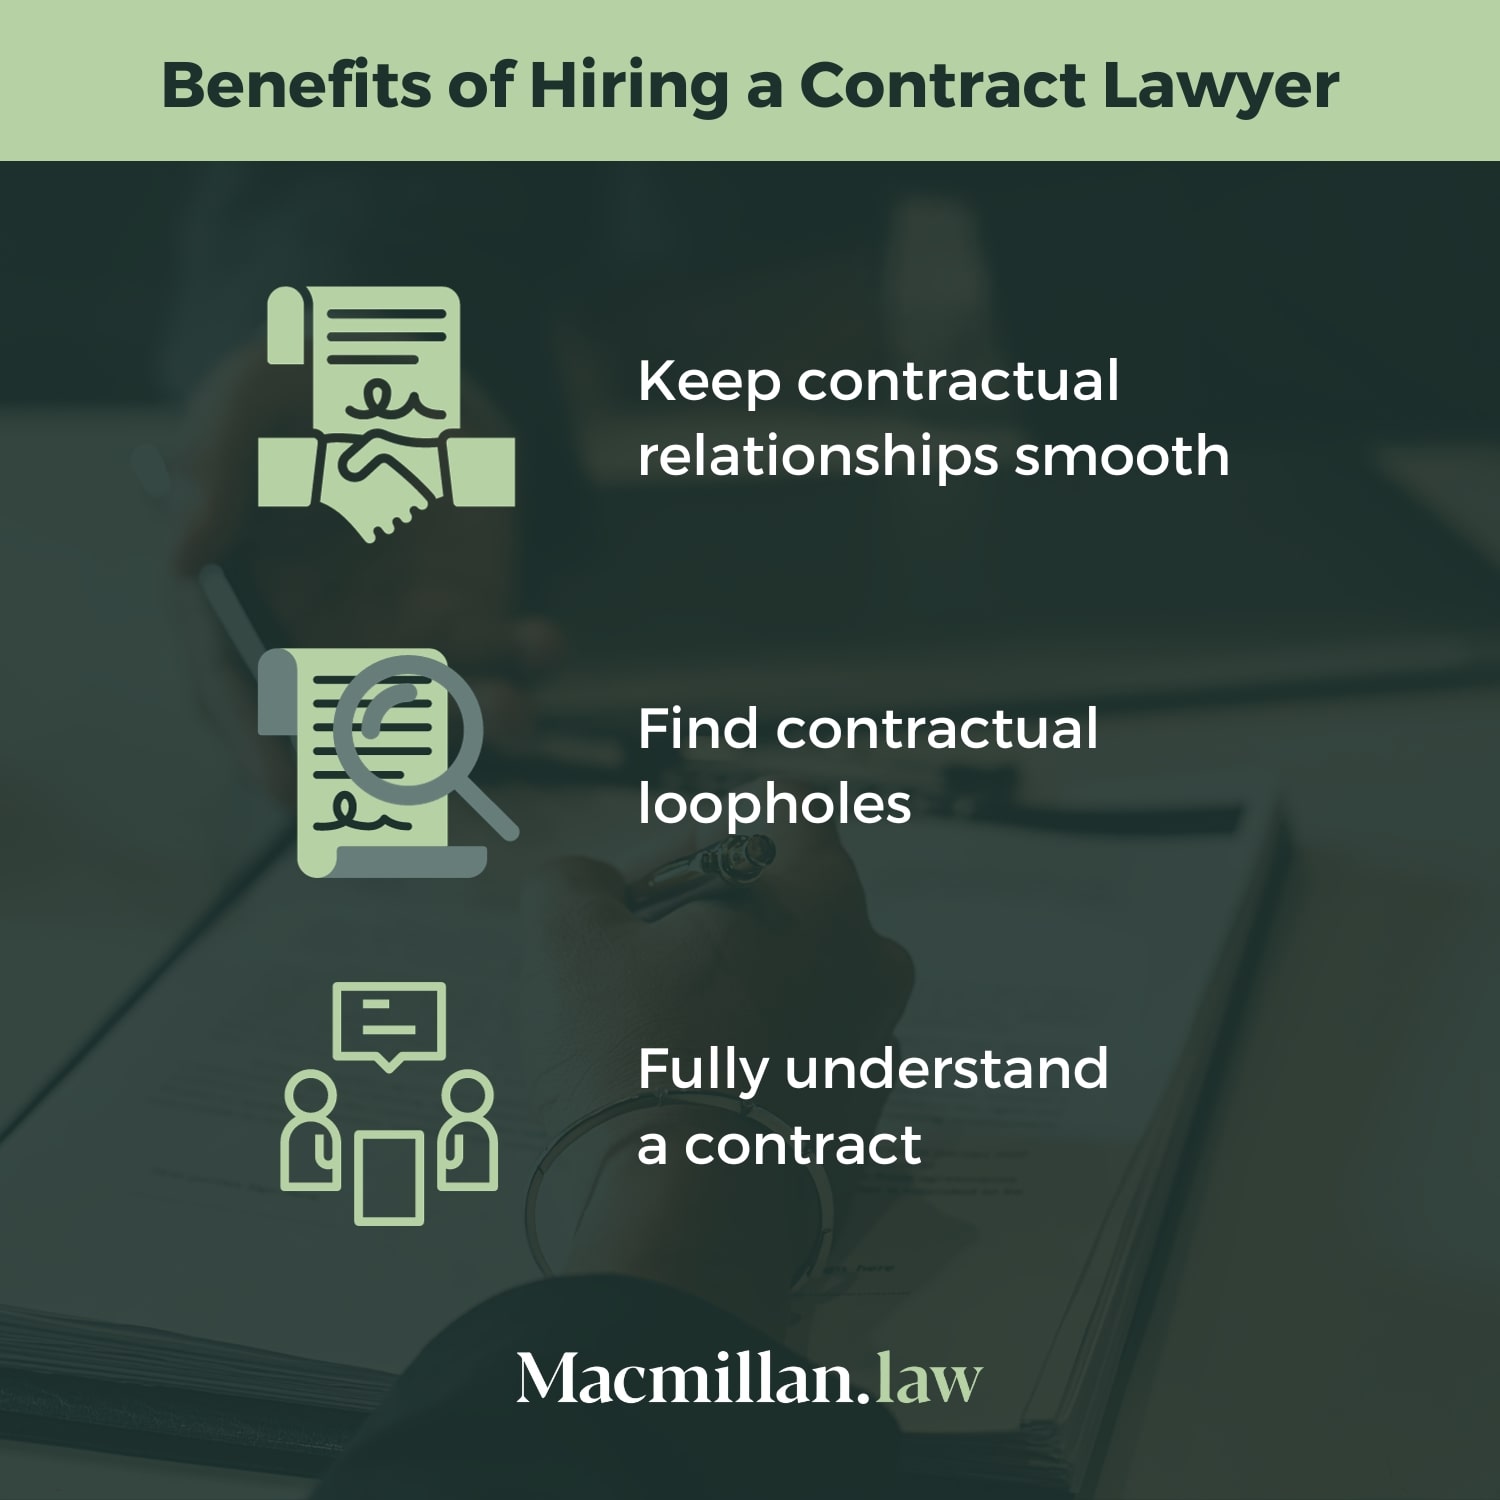 Hiring A Contract Lawyer Benefits